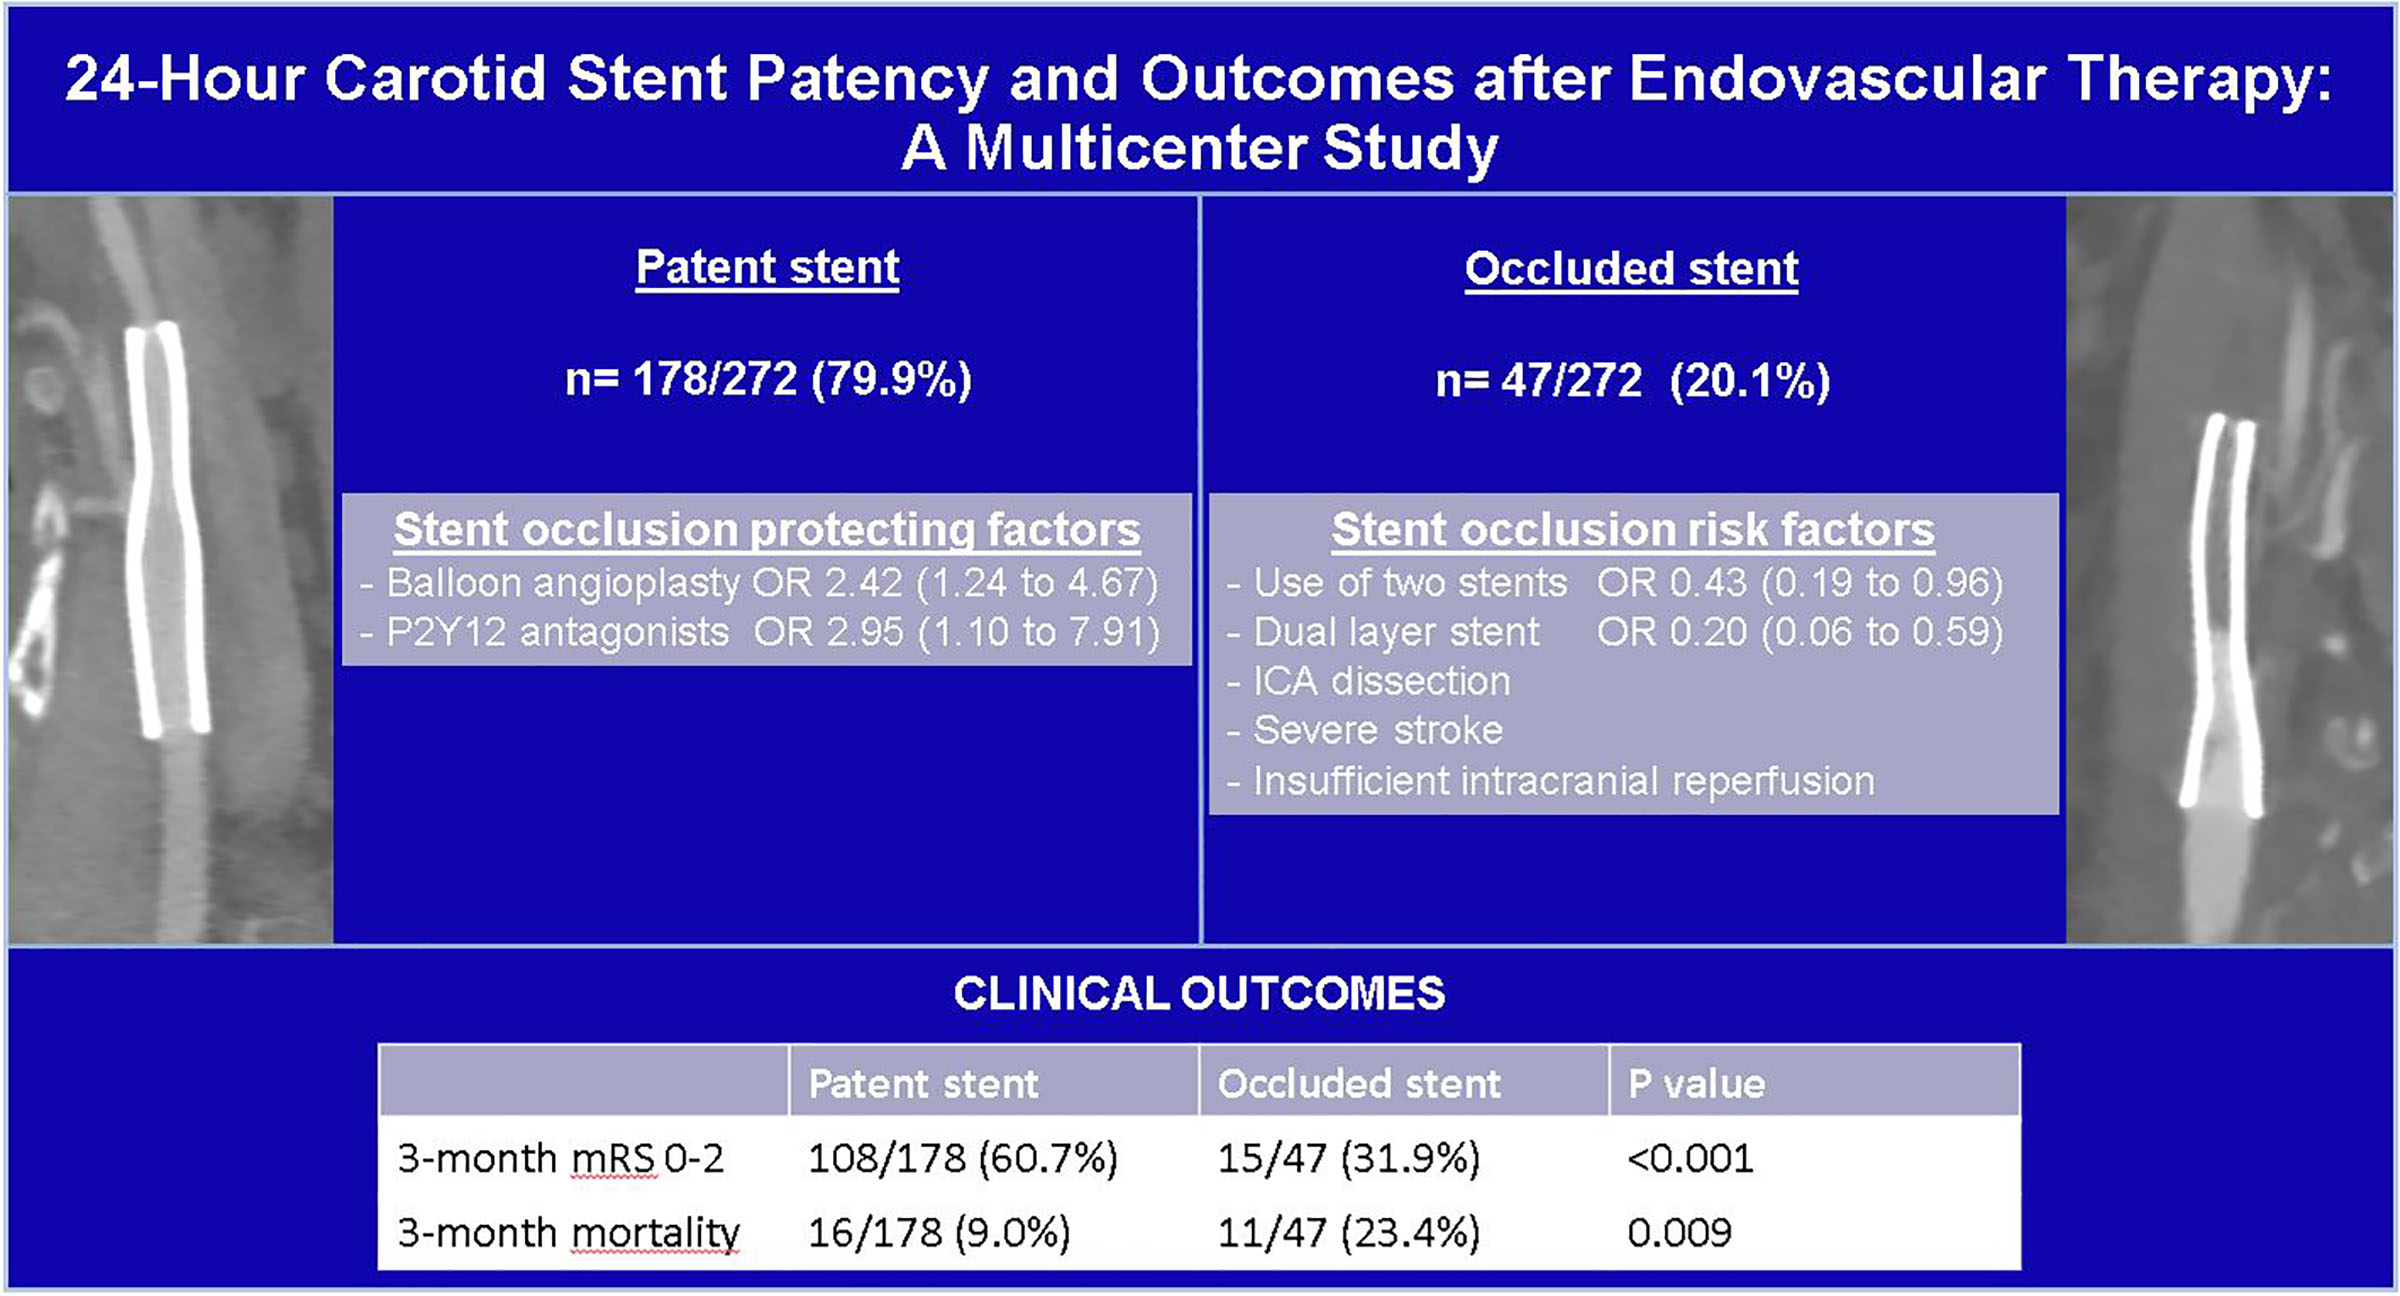 24-Hour Carotid Stent Patency and Outcomes After Endovascular Therapy: A Multicenter Study